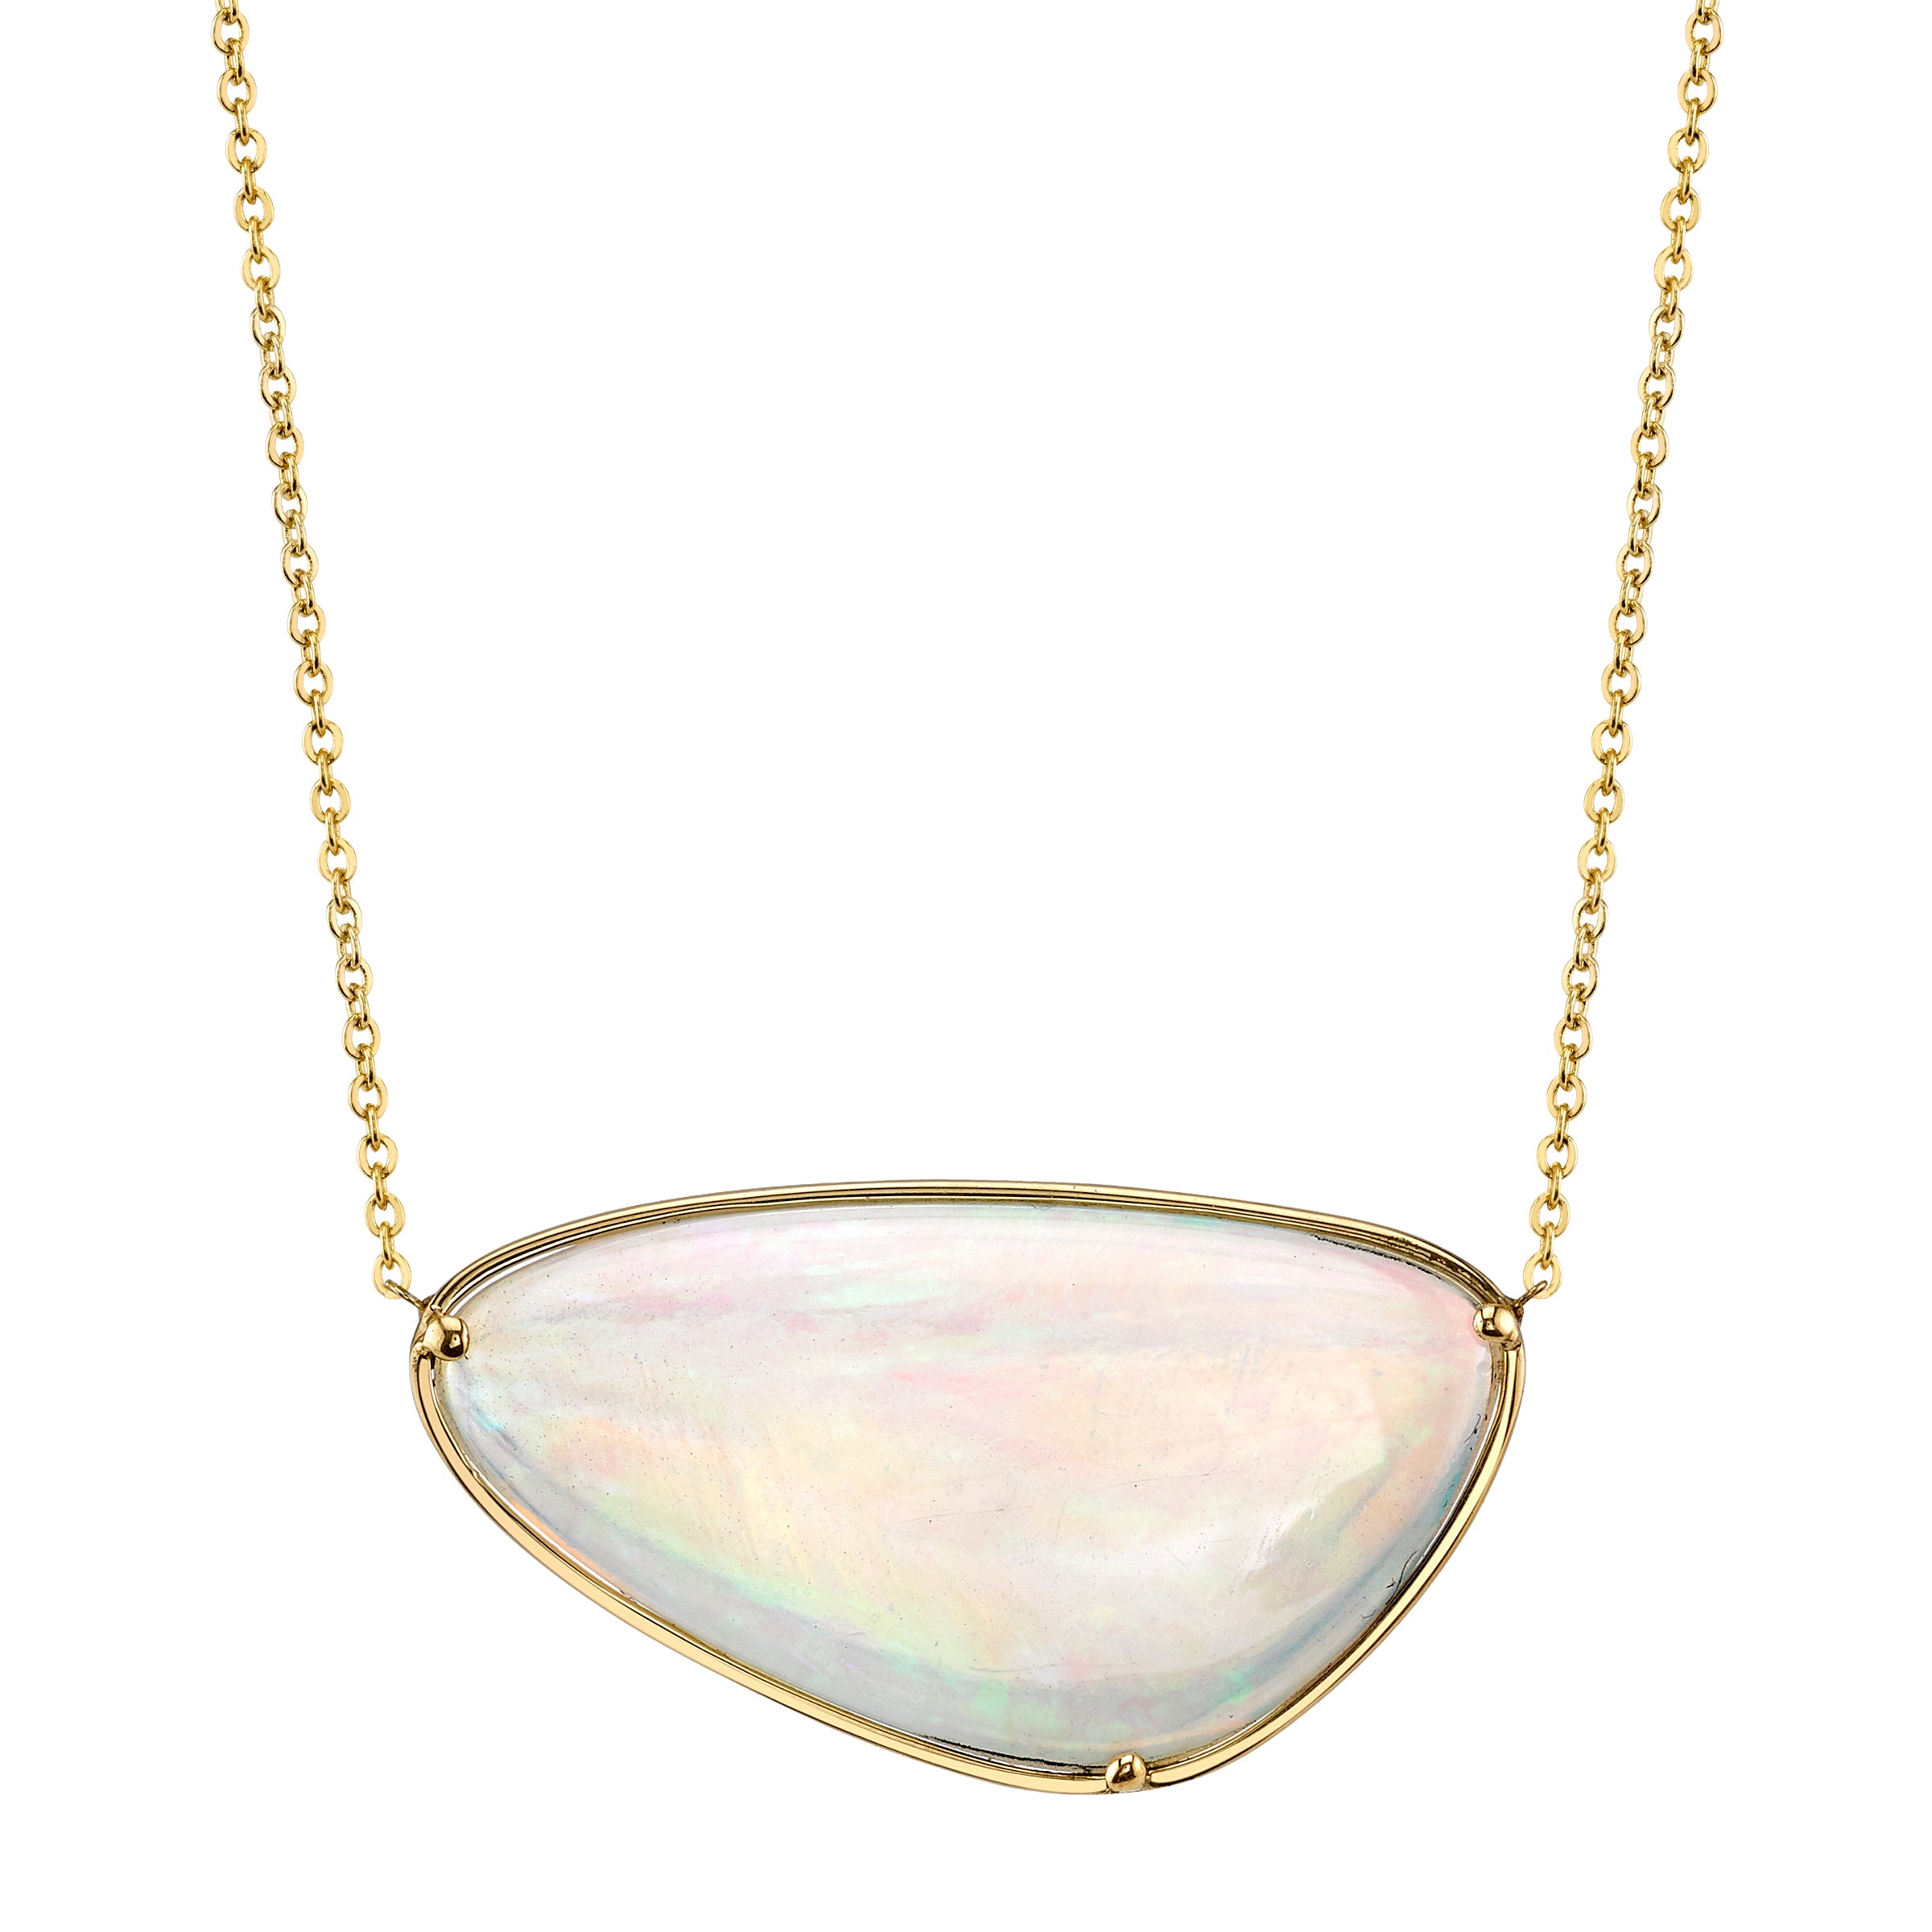 One of a Kind Opal Necklace in Yellow Gold